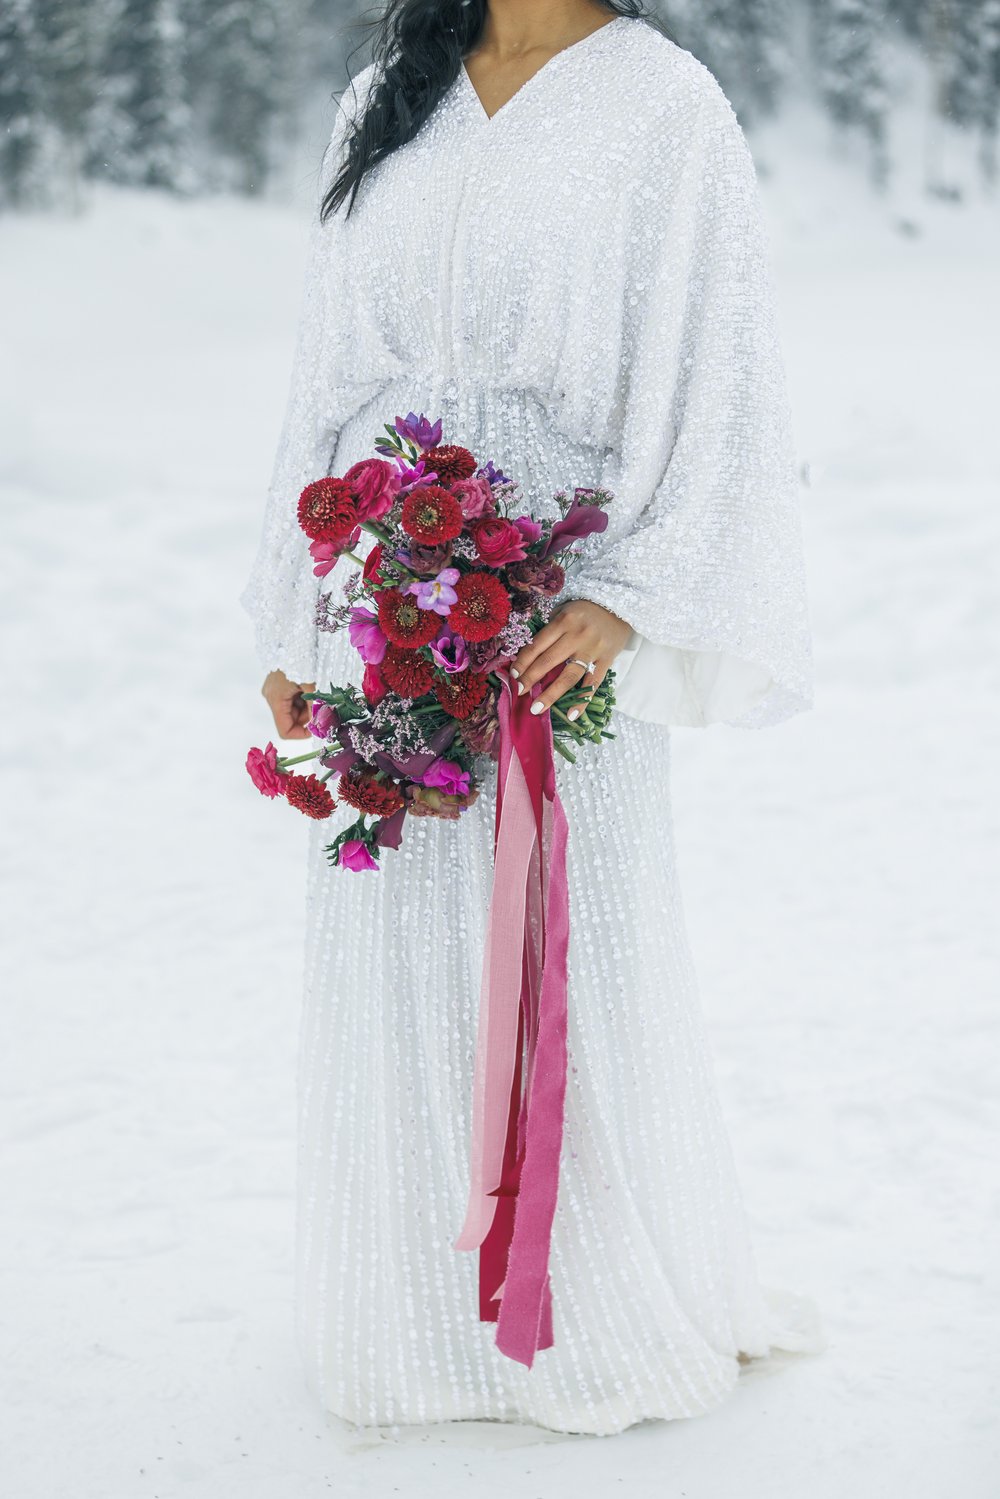  Colorful winter bouquets stand out against white snow by Savanna Richardson Photography. winter bouquet #SavannaRichardsonPhotography #SavannaRichardsonBridals #WinterBridals #WinterWedding #TibbleForkBridals #UtahBridals #MountainBridals 